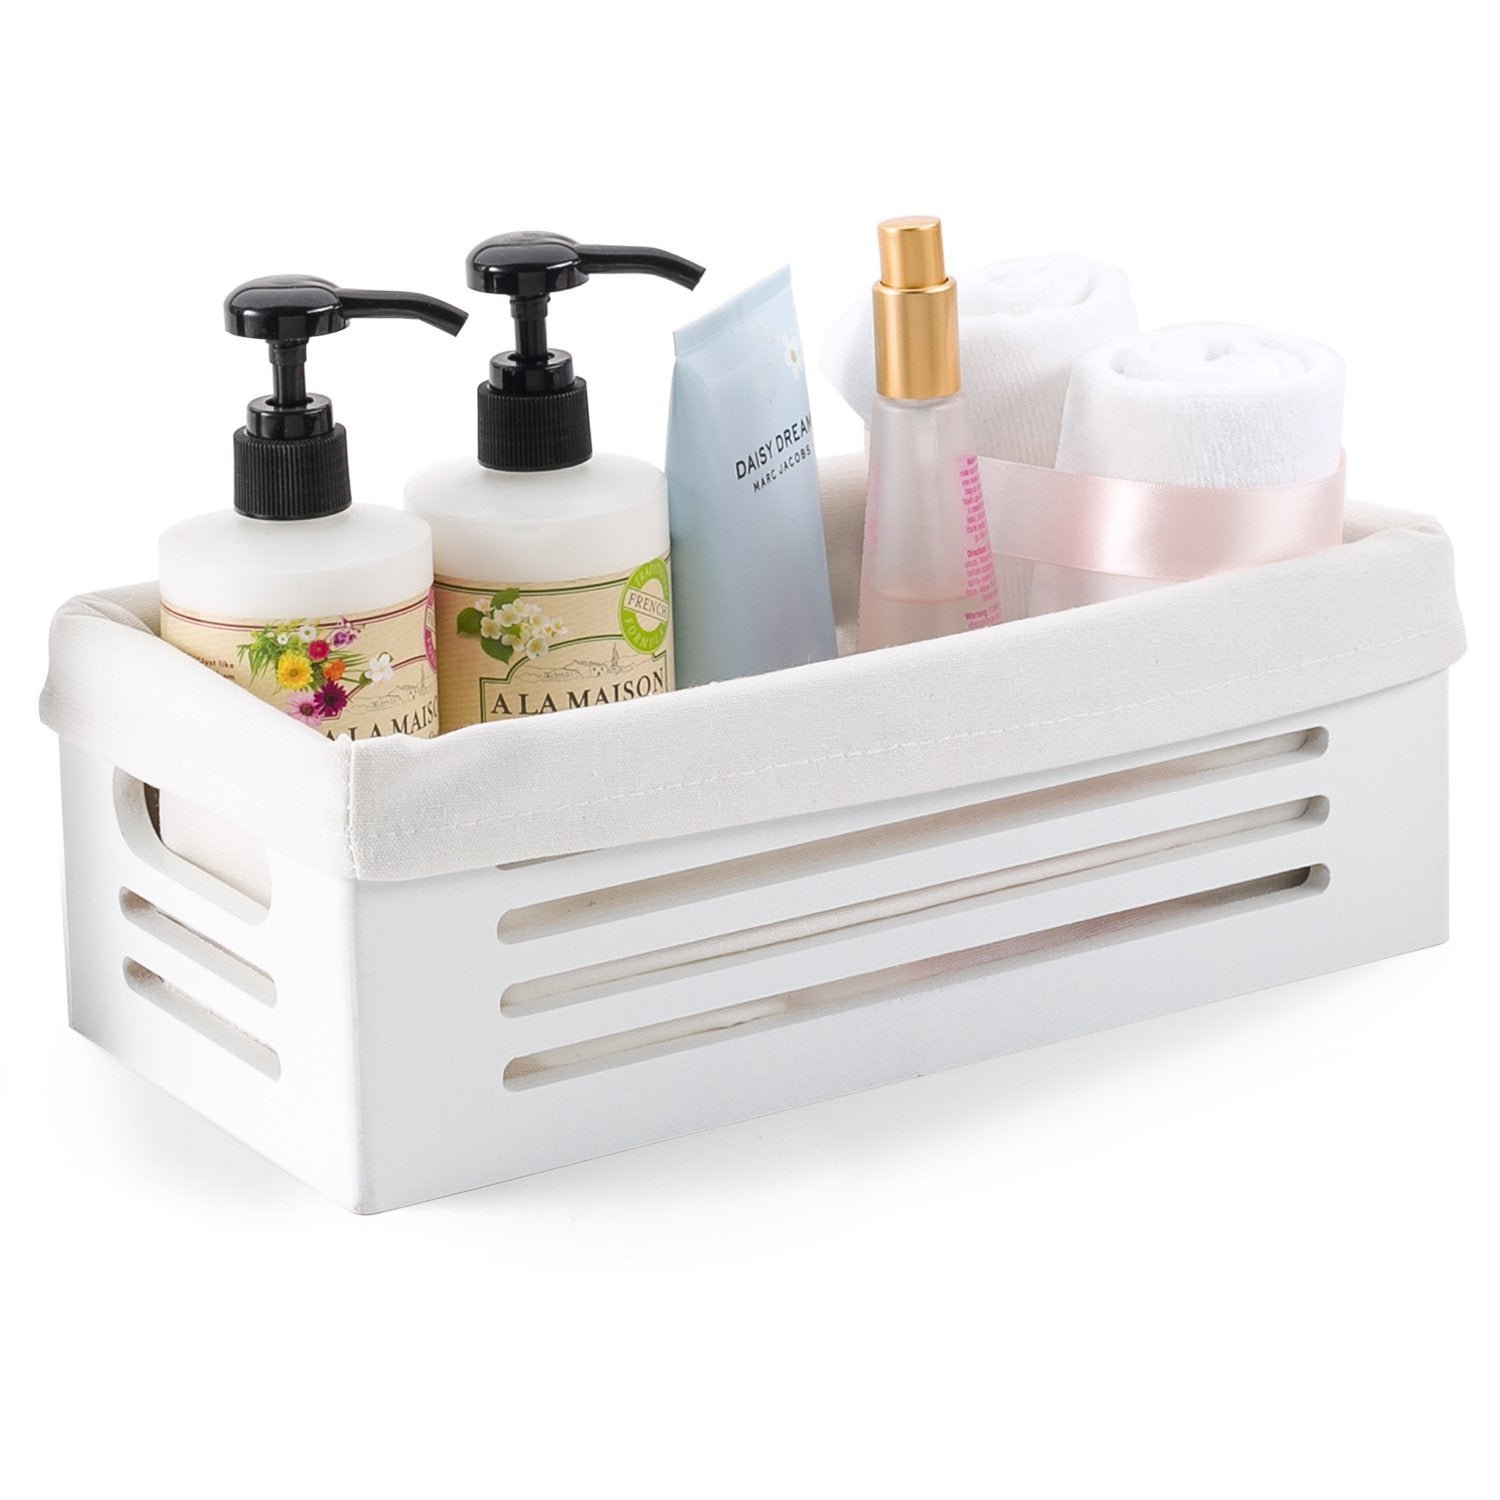 Wooden Storage Bin Container - Decorative Closet, Cabinet and Shelf Basket Organizer Lined with Machine Washable Soft Linen Fabric - White, Extra Small